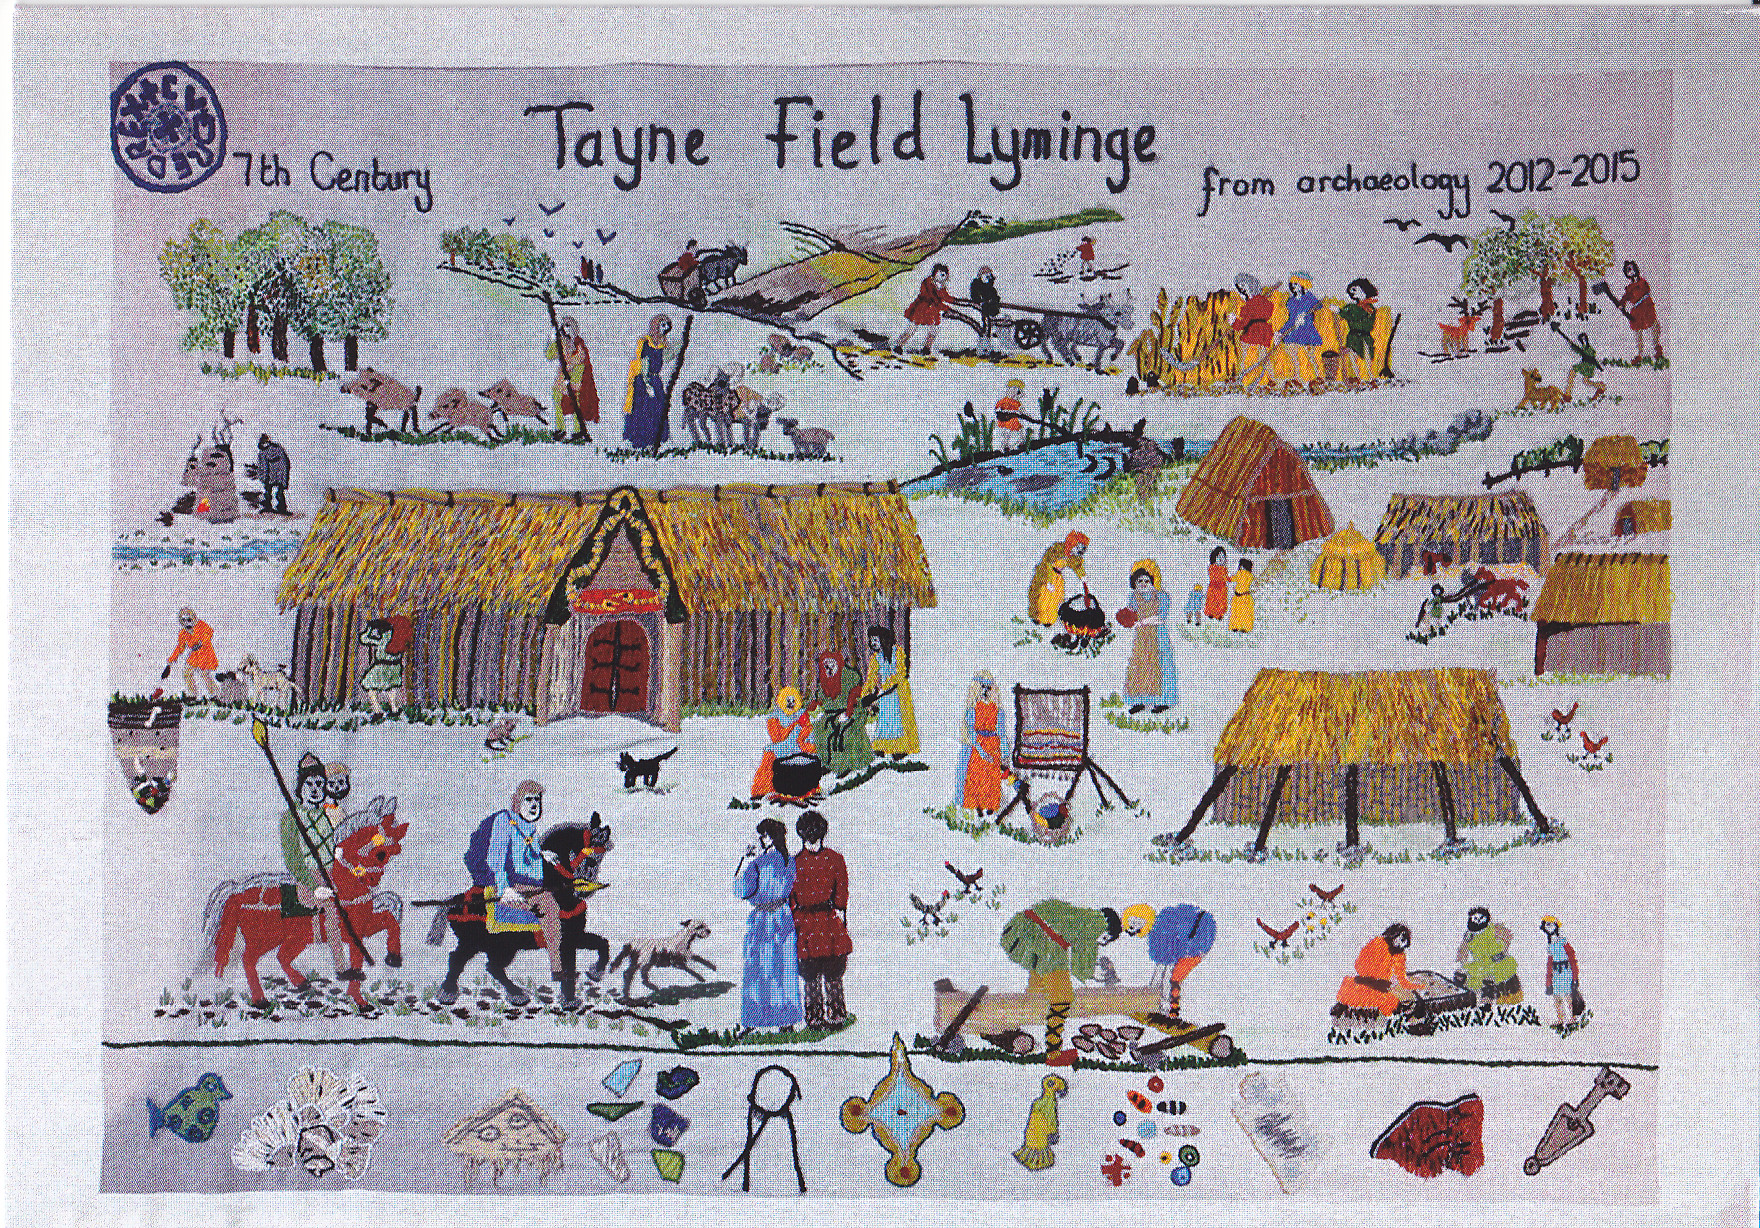 The stunning Lyminge Tapestry commemorating the excavation and the archaeology of Lyminge